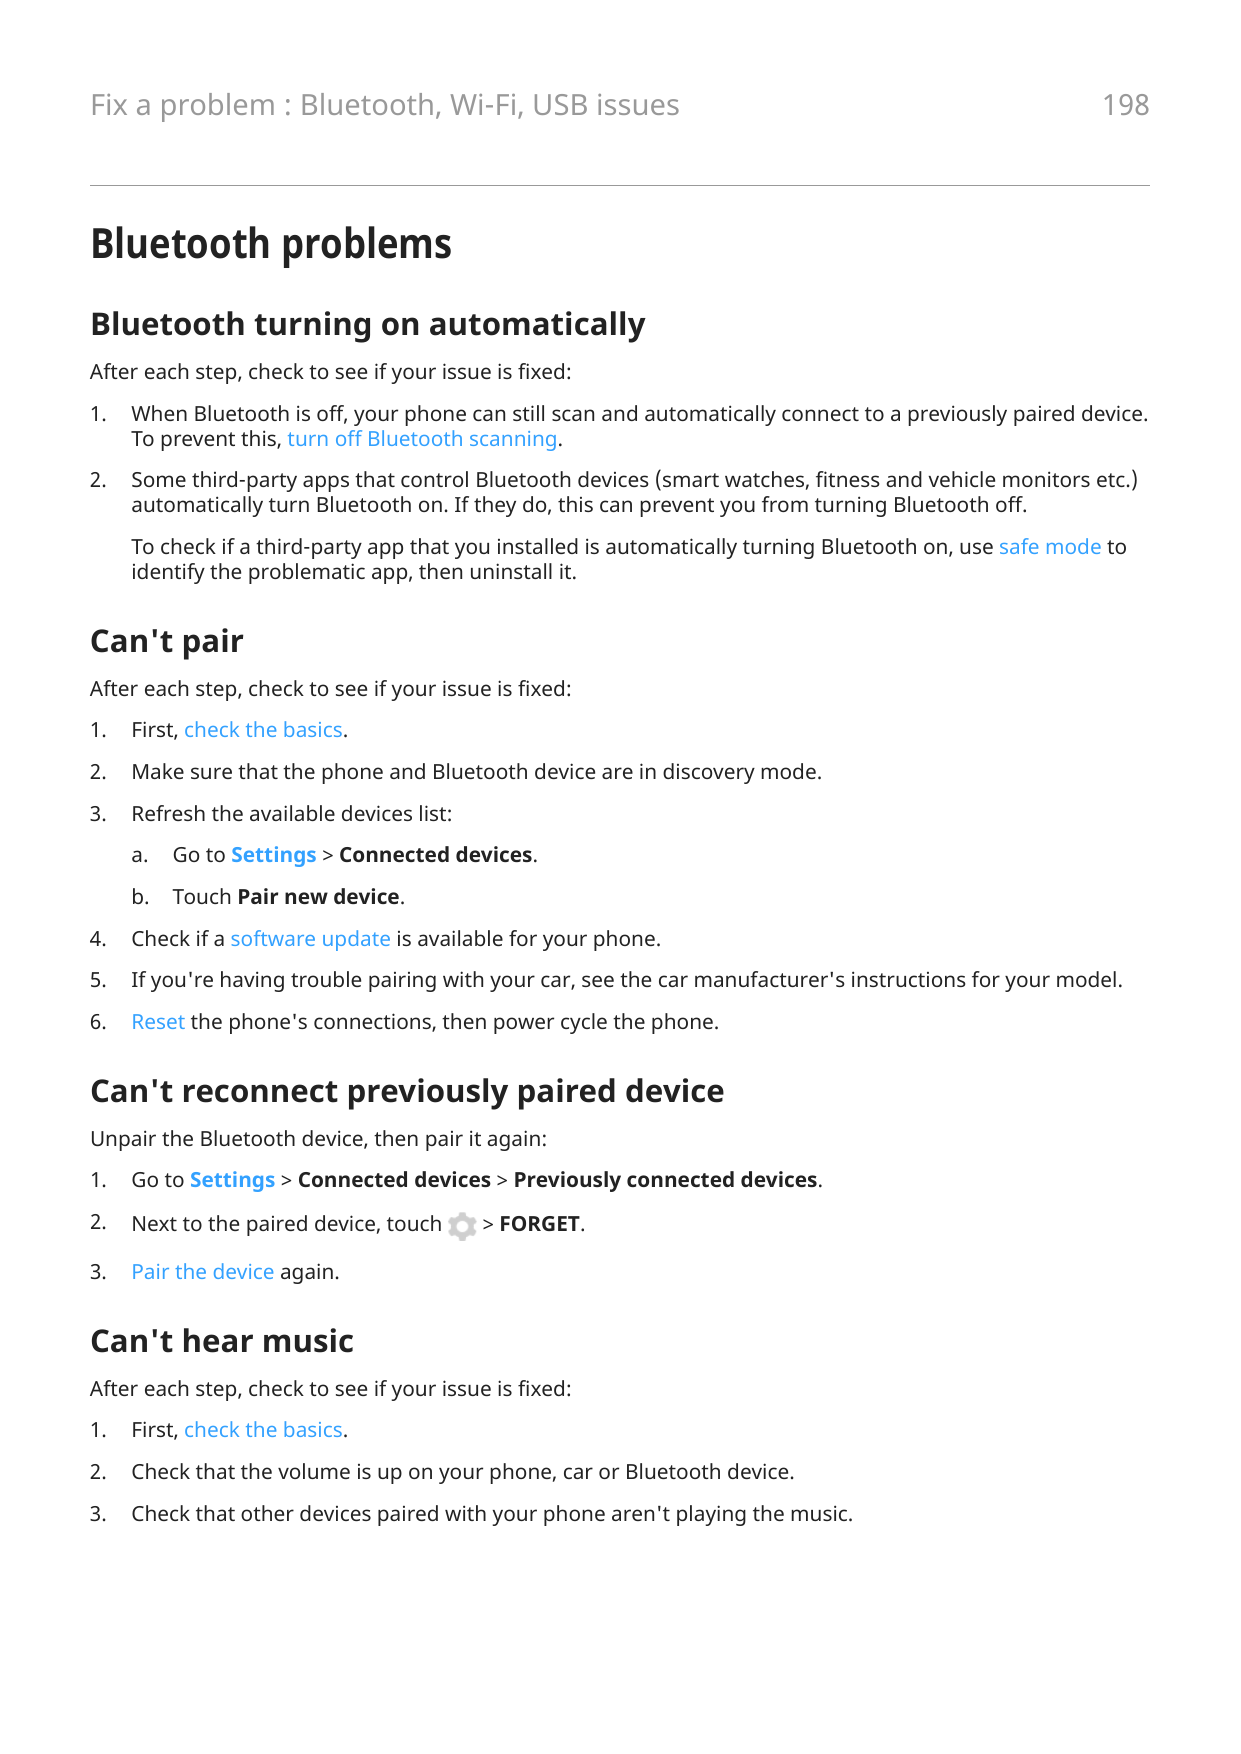 Fix a problem : Bluetooth, Wi-Fi, USB issues198Bluetooth problemsBluetooth turning on automaticallyAfter each step, check to see